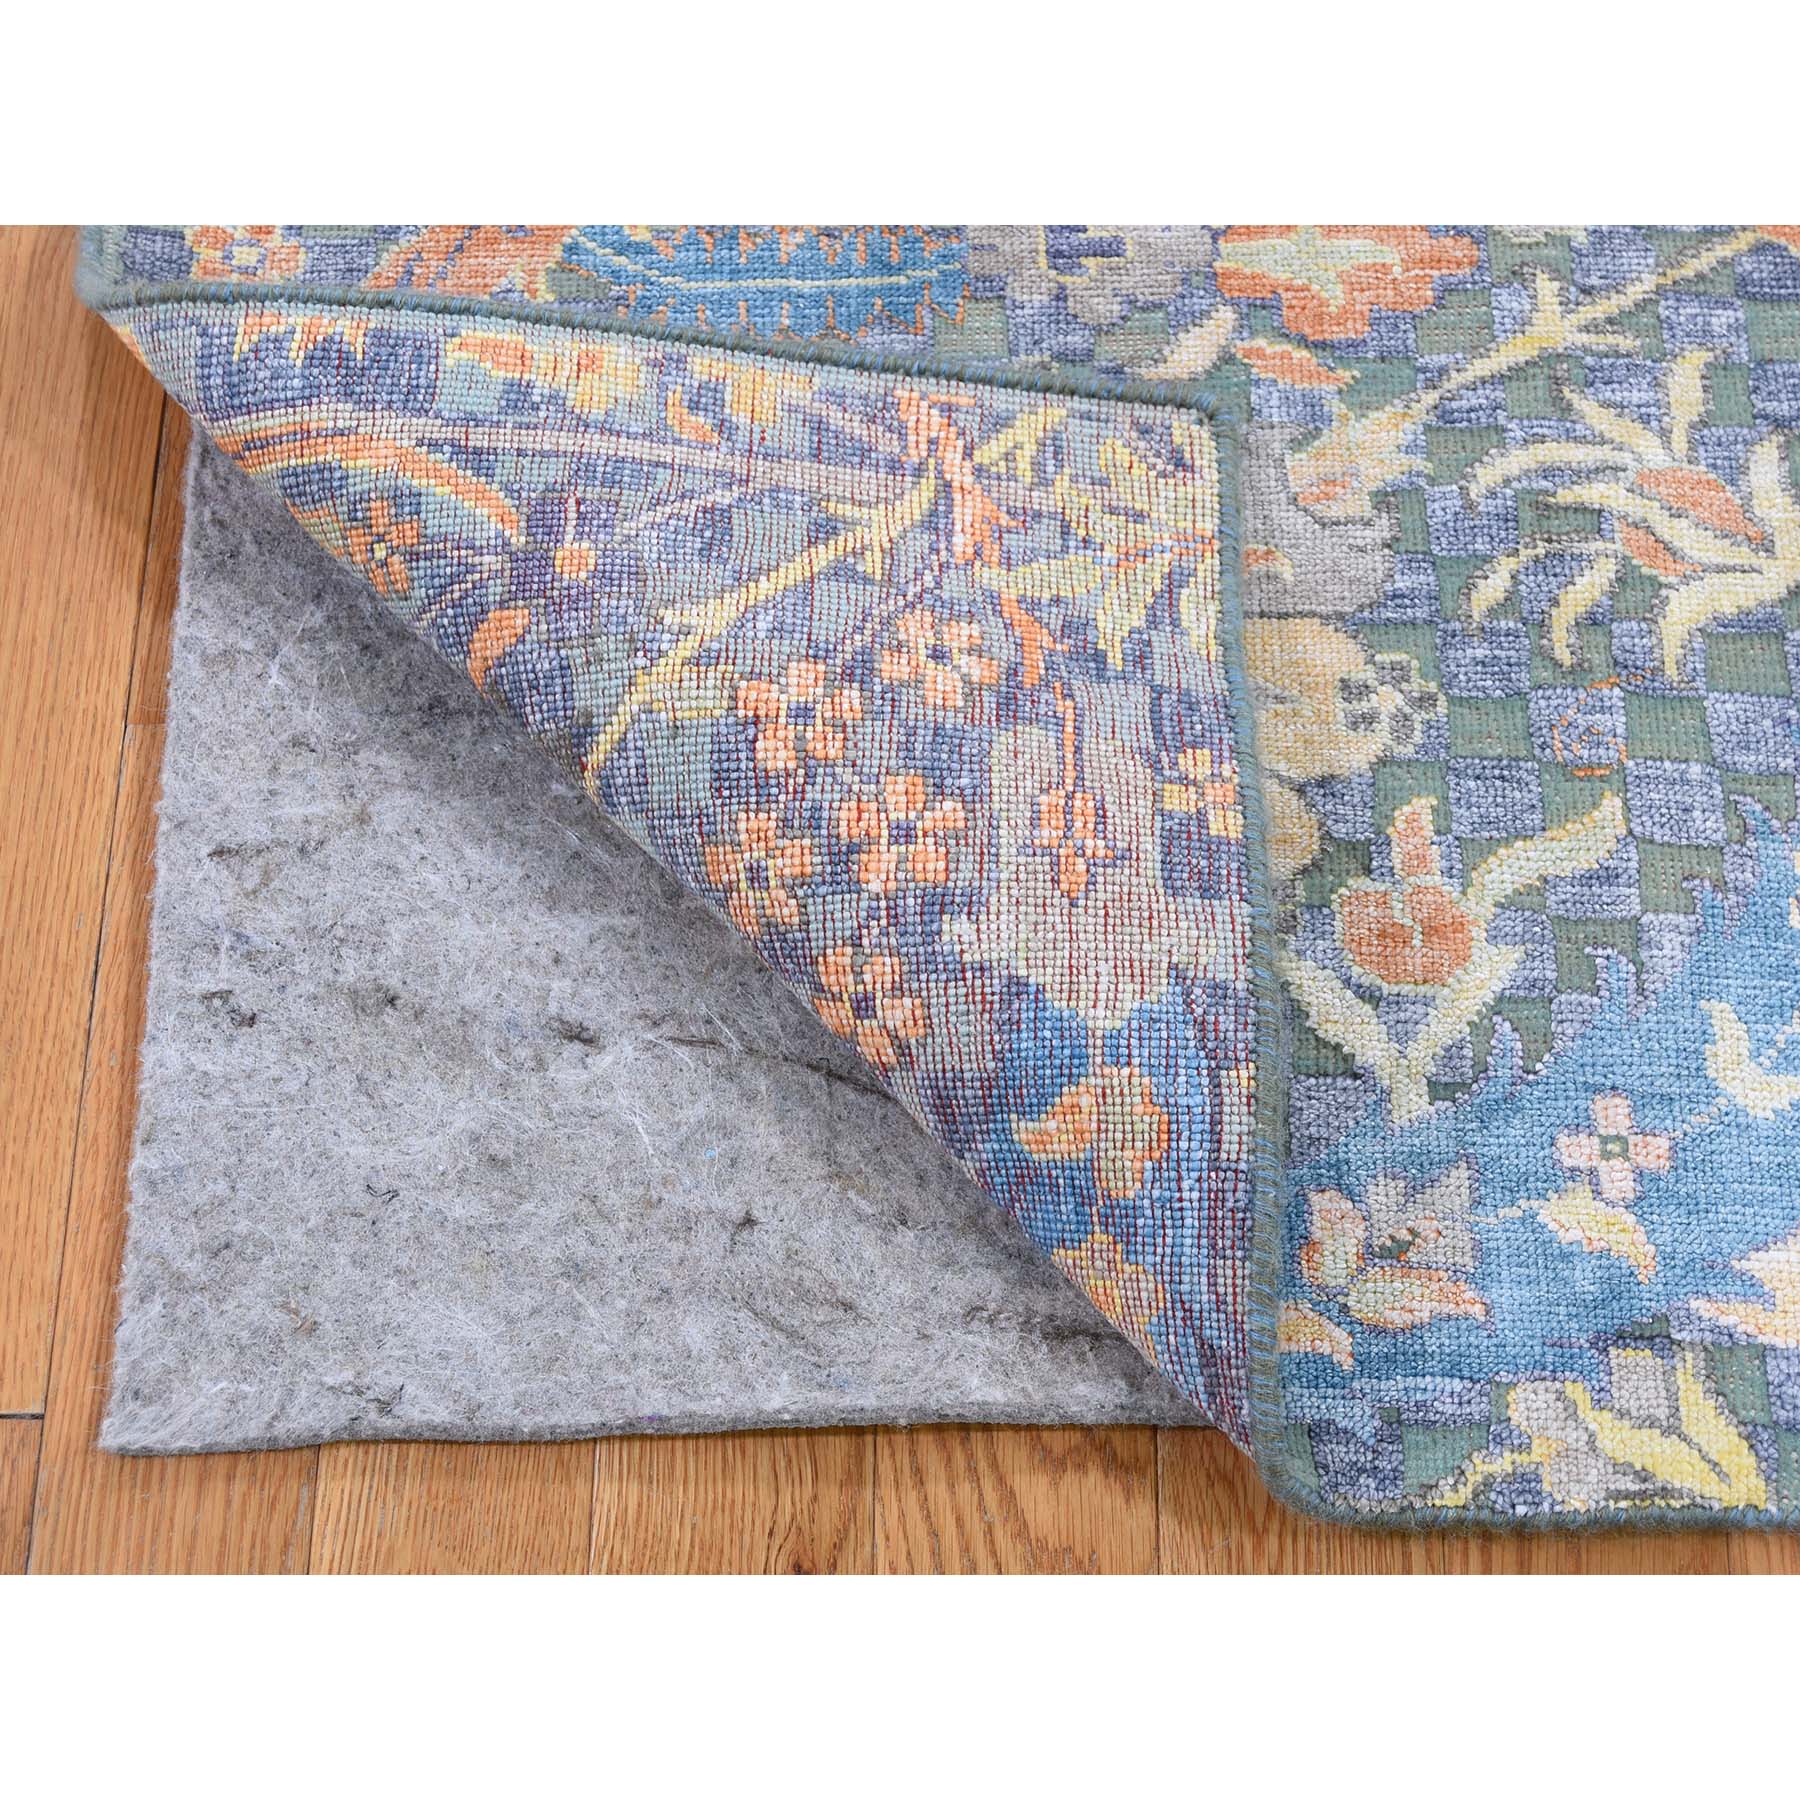 2-2 x2-2  Sickle Leaf Design Square Silk With Oxidized Wool Hand-Knotted Oriental Rug 